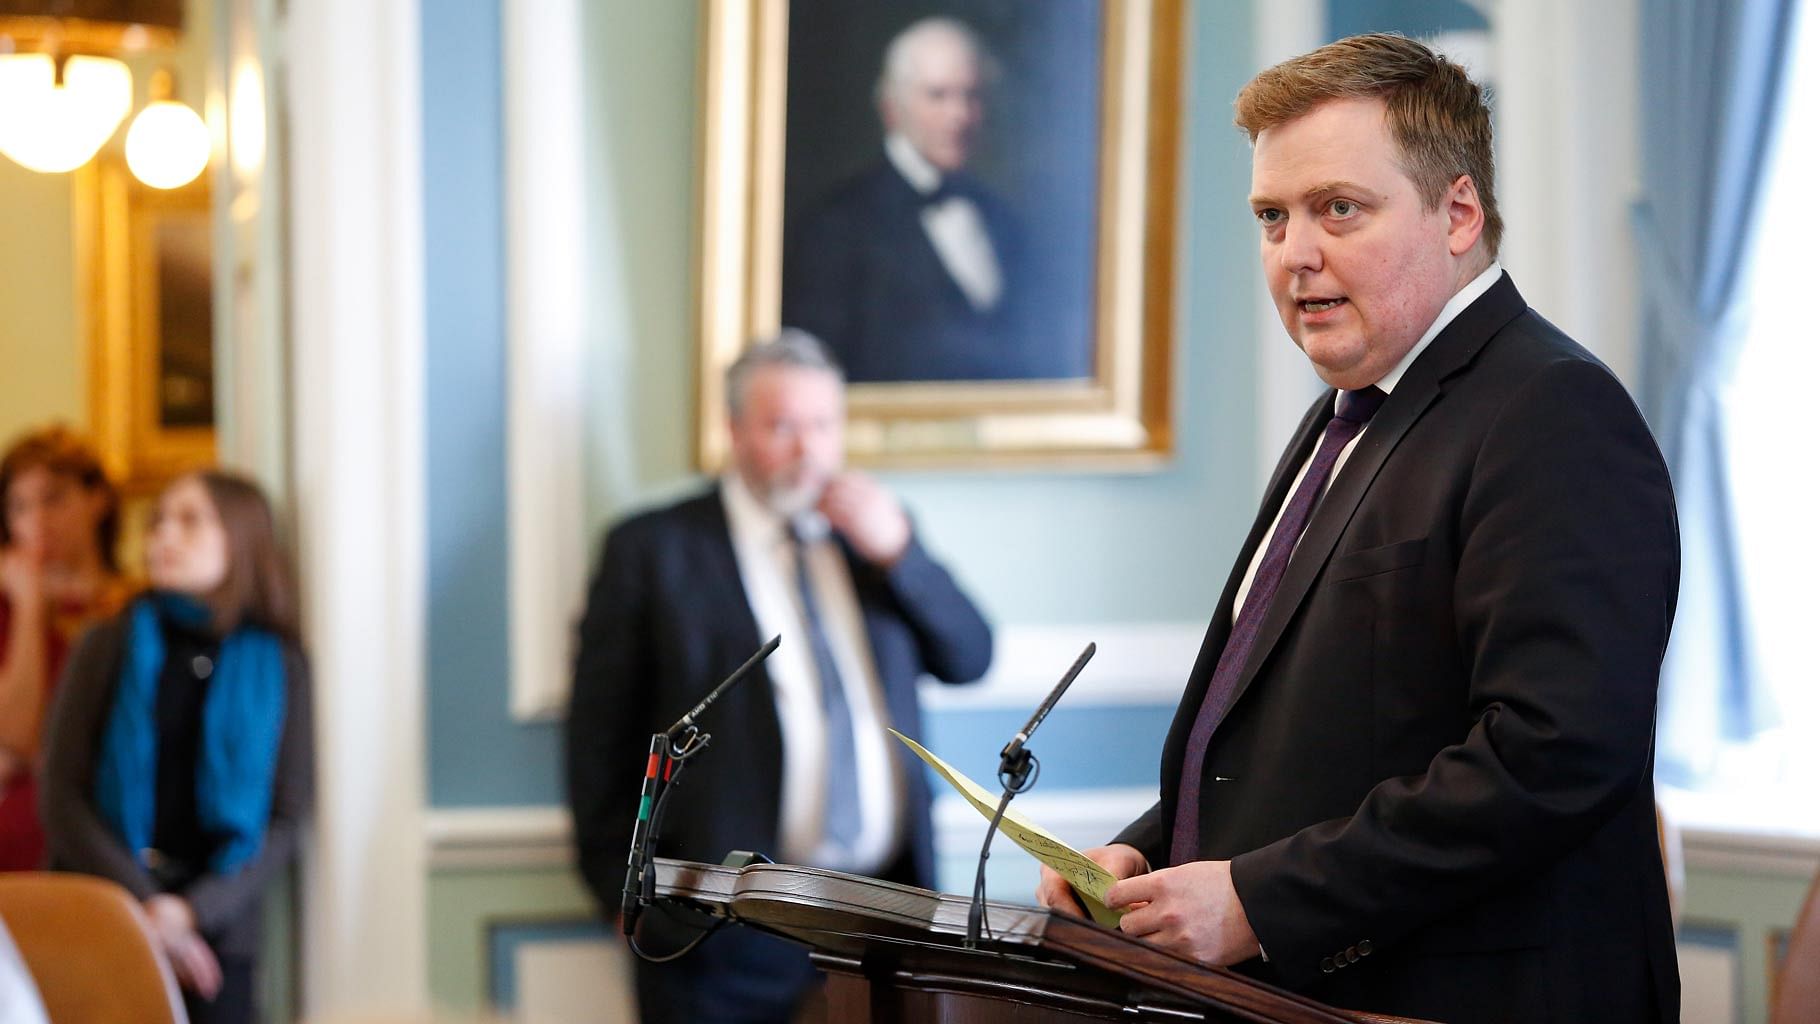 Iceland’s Prime Minister Sigmundur David Gunnlaugsson, during a parliamentary session in Reykjavik on Monday, 4 April 2016. (Photo: AP)